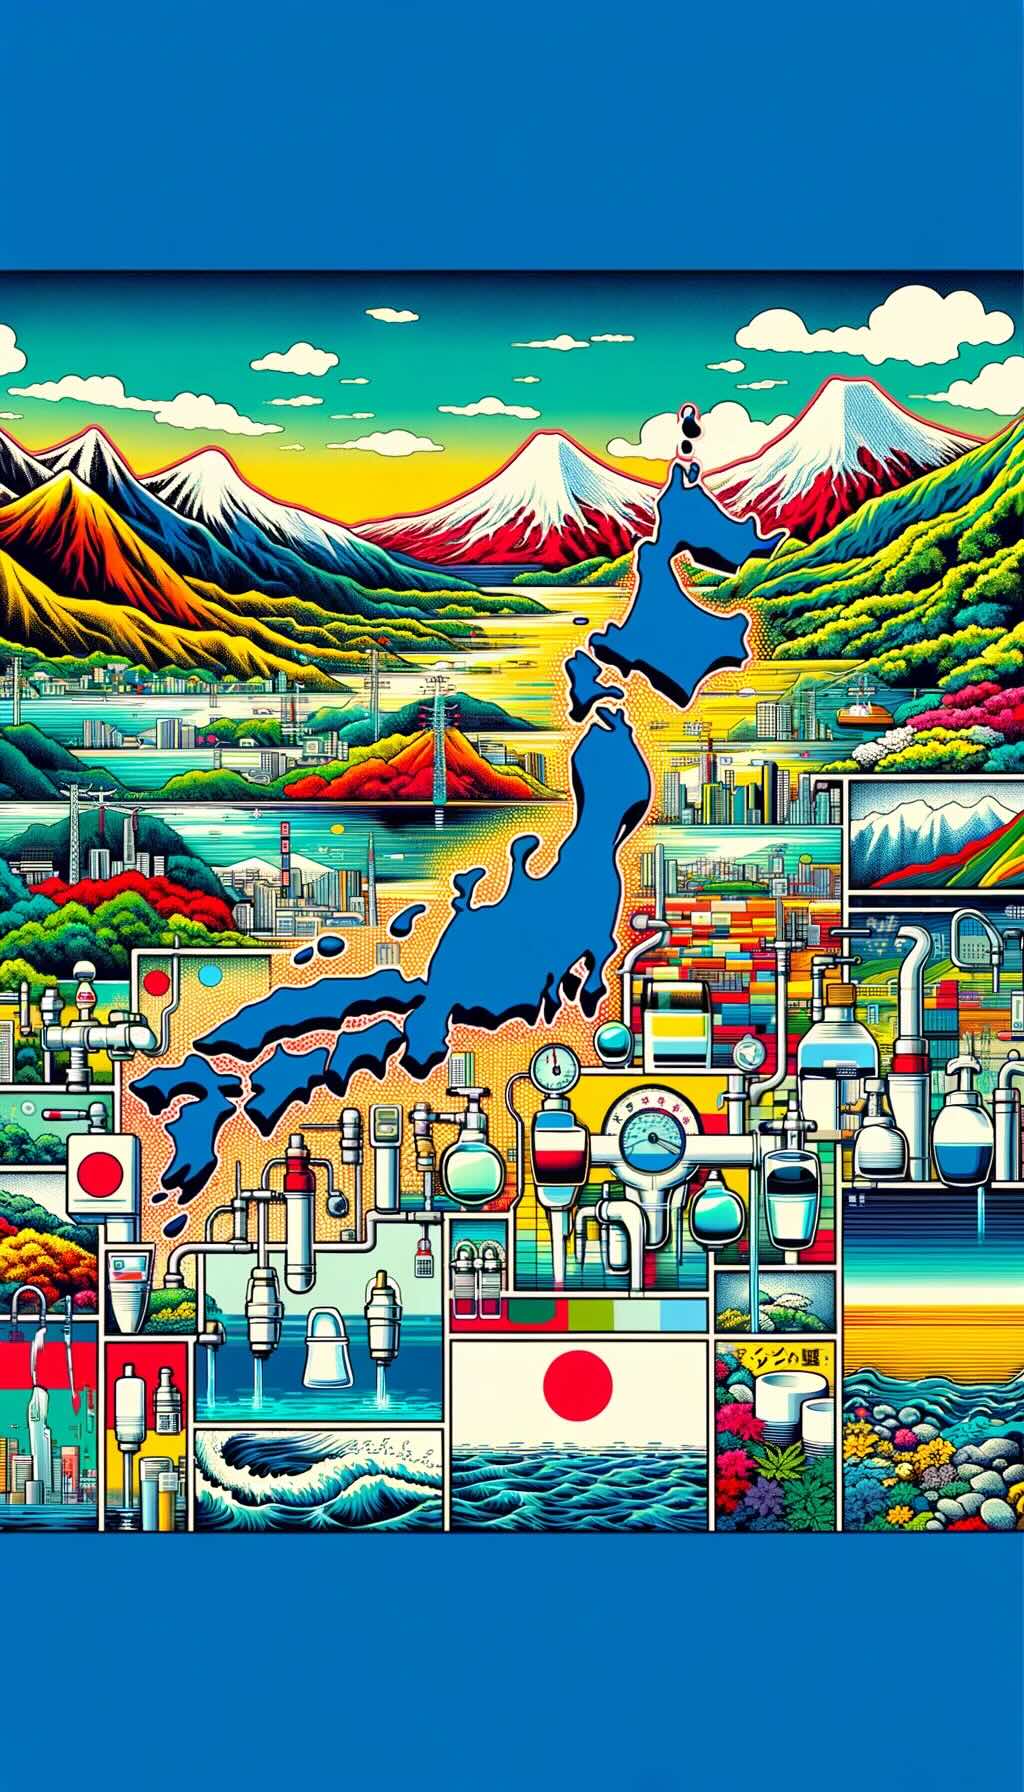 Regional differences in tap water quality across Japan depicts the diverse landscapes of Japan, from the mountains of Hokkaido to the beaches of Okinawa, and illustrates their influence on the tap water quality. The artwork shows areas like Tokyo, Kyoto, and Sapporo, where the tap water is particularly pure and a source of local pride. It also highlights regions where travelers might need to exercise caution with tap water, especially in remote or rural areas. The image captures the mosaic of water tastes and qualities in Japan, emphasizing the areas where tap water is not just safe but a delightful experience, and areas where caution is advised. The artwork is visually engaging, showcasing the variety and safety of tap water in Japan.